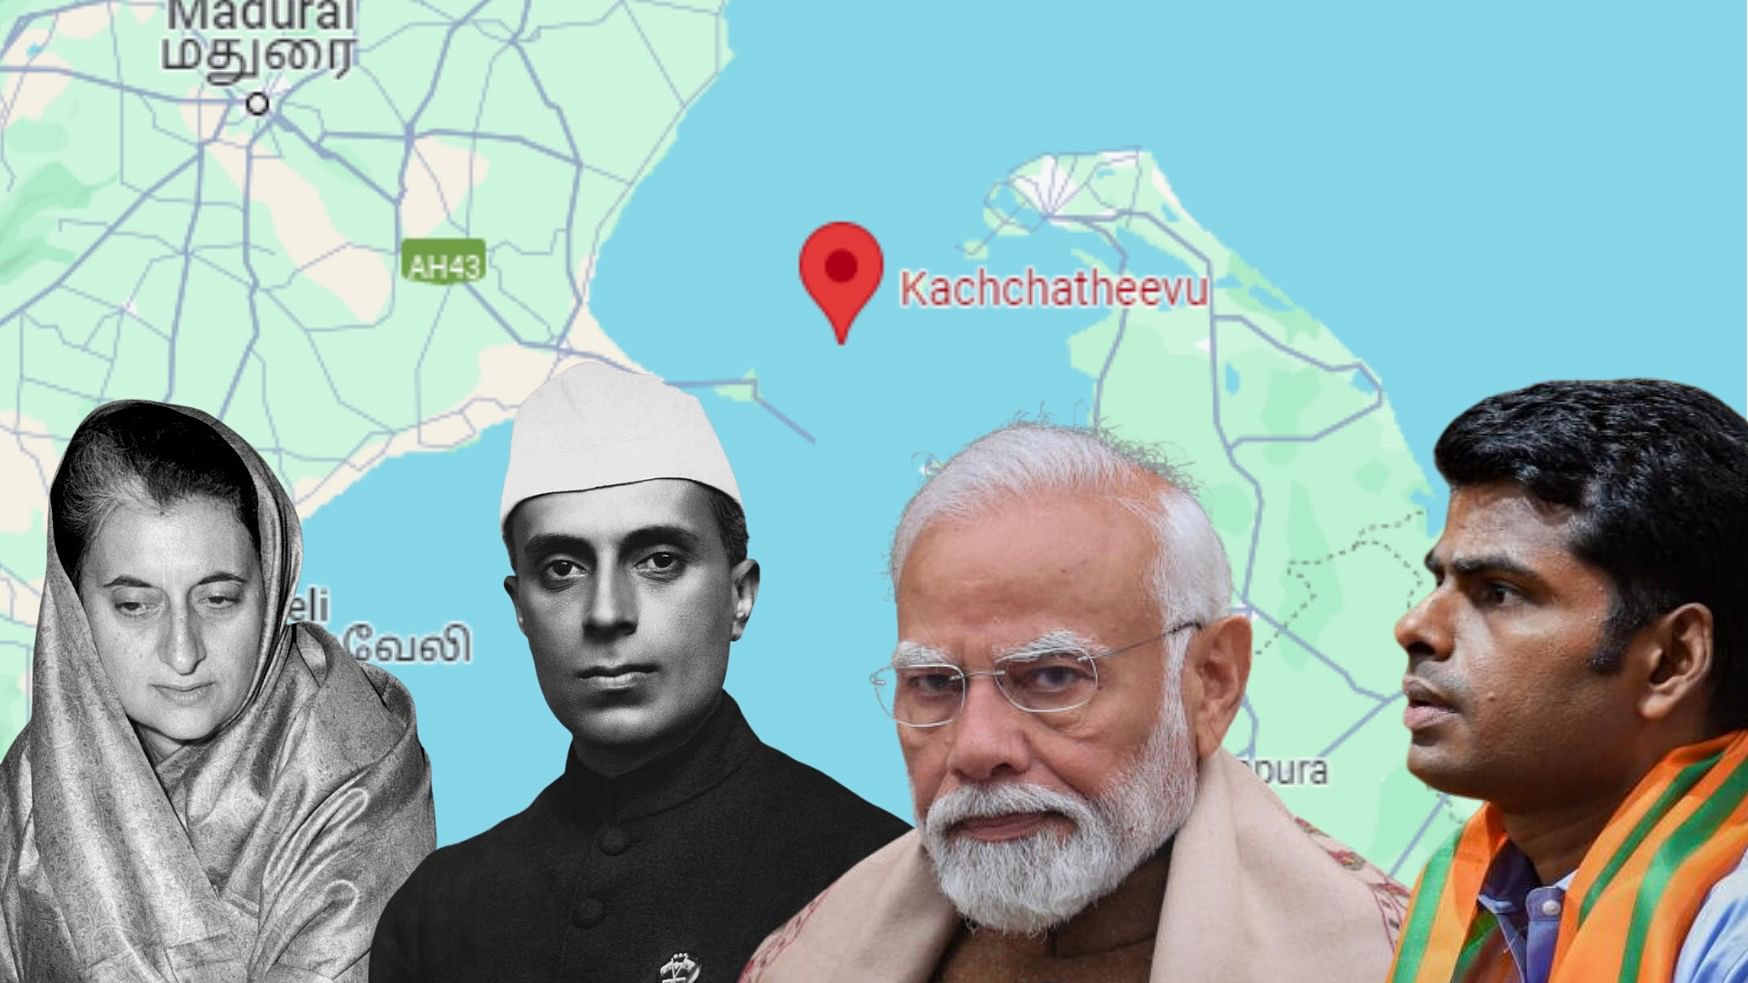 <div class="paragraphs"><p>As part of her ‘Indo-Sri Lankan Maritime agreement’, with her counterpart Srimavo Bandaranaike, Indira Gandhi ceded Katchatheevu to Sri Lanka in 1974. </p></div>